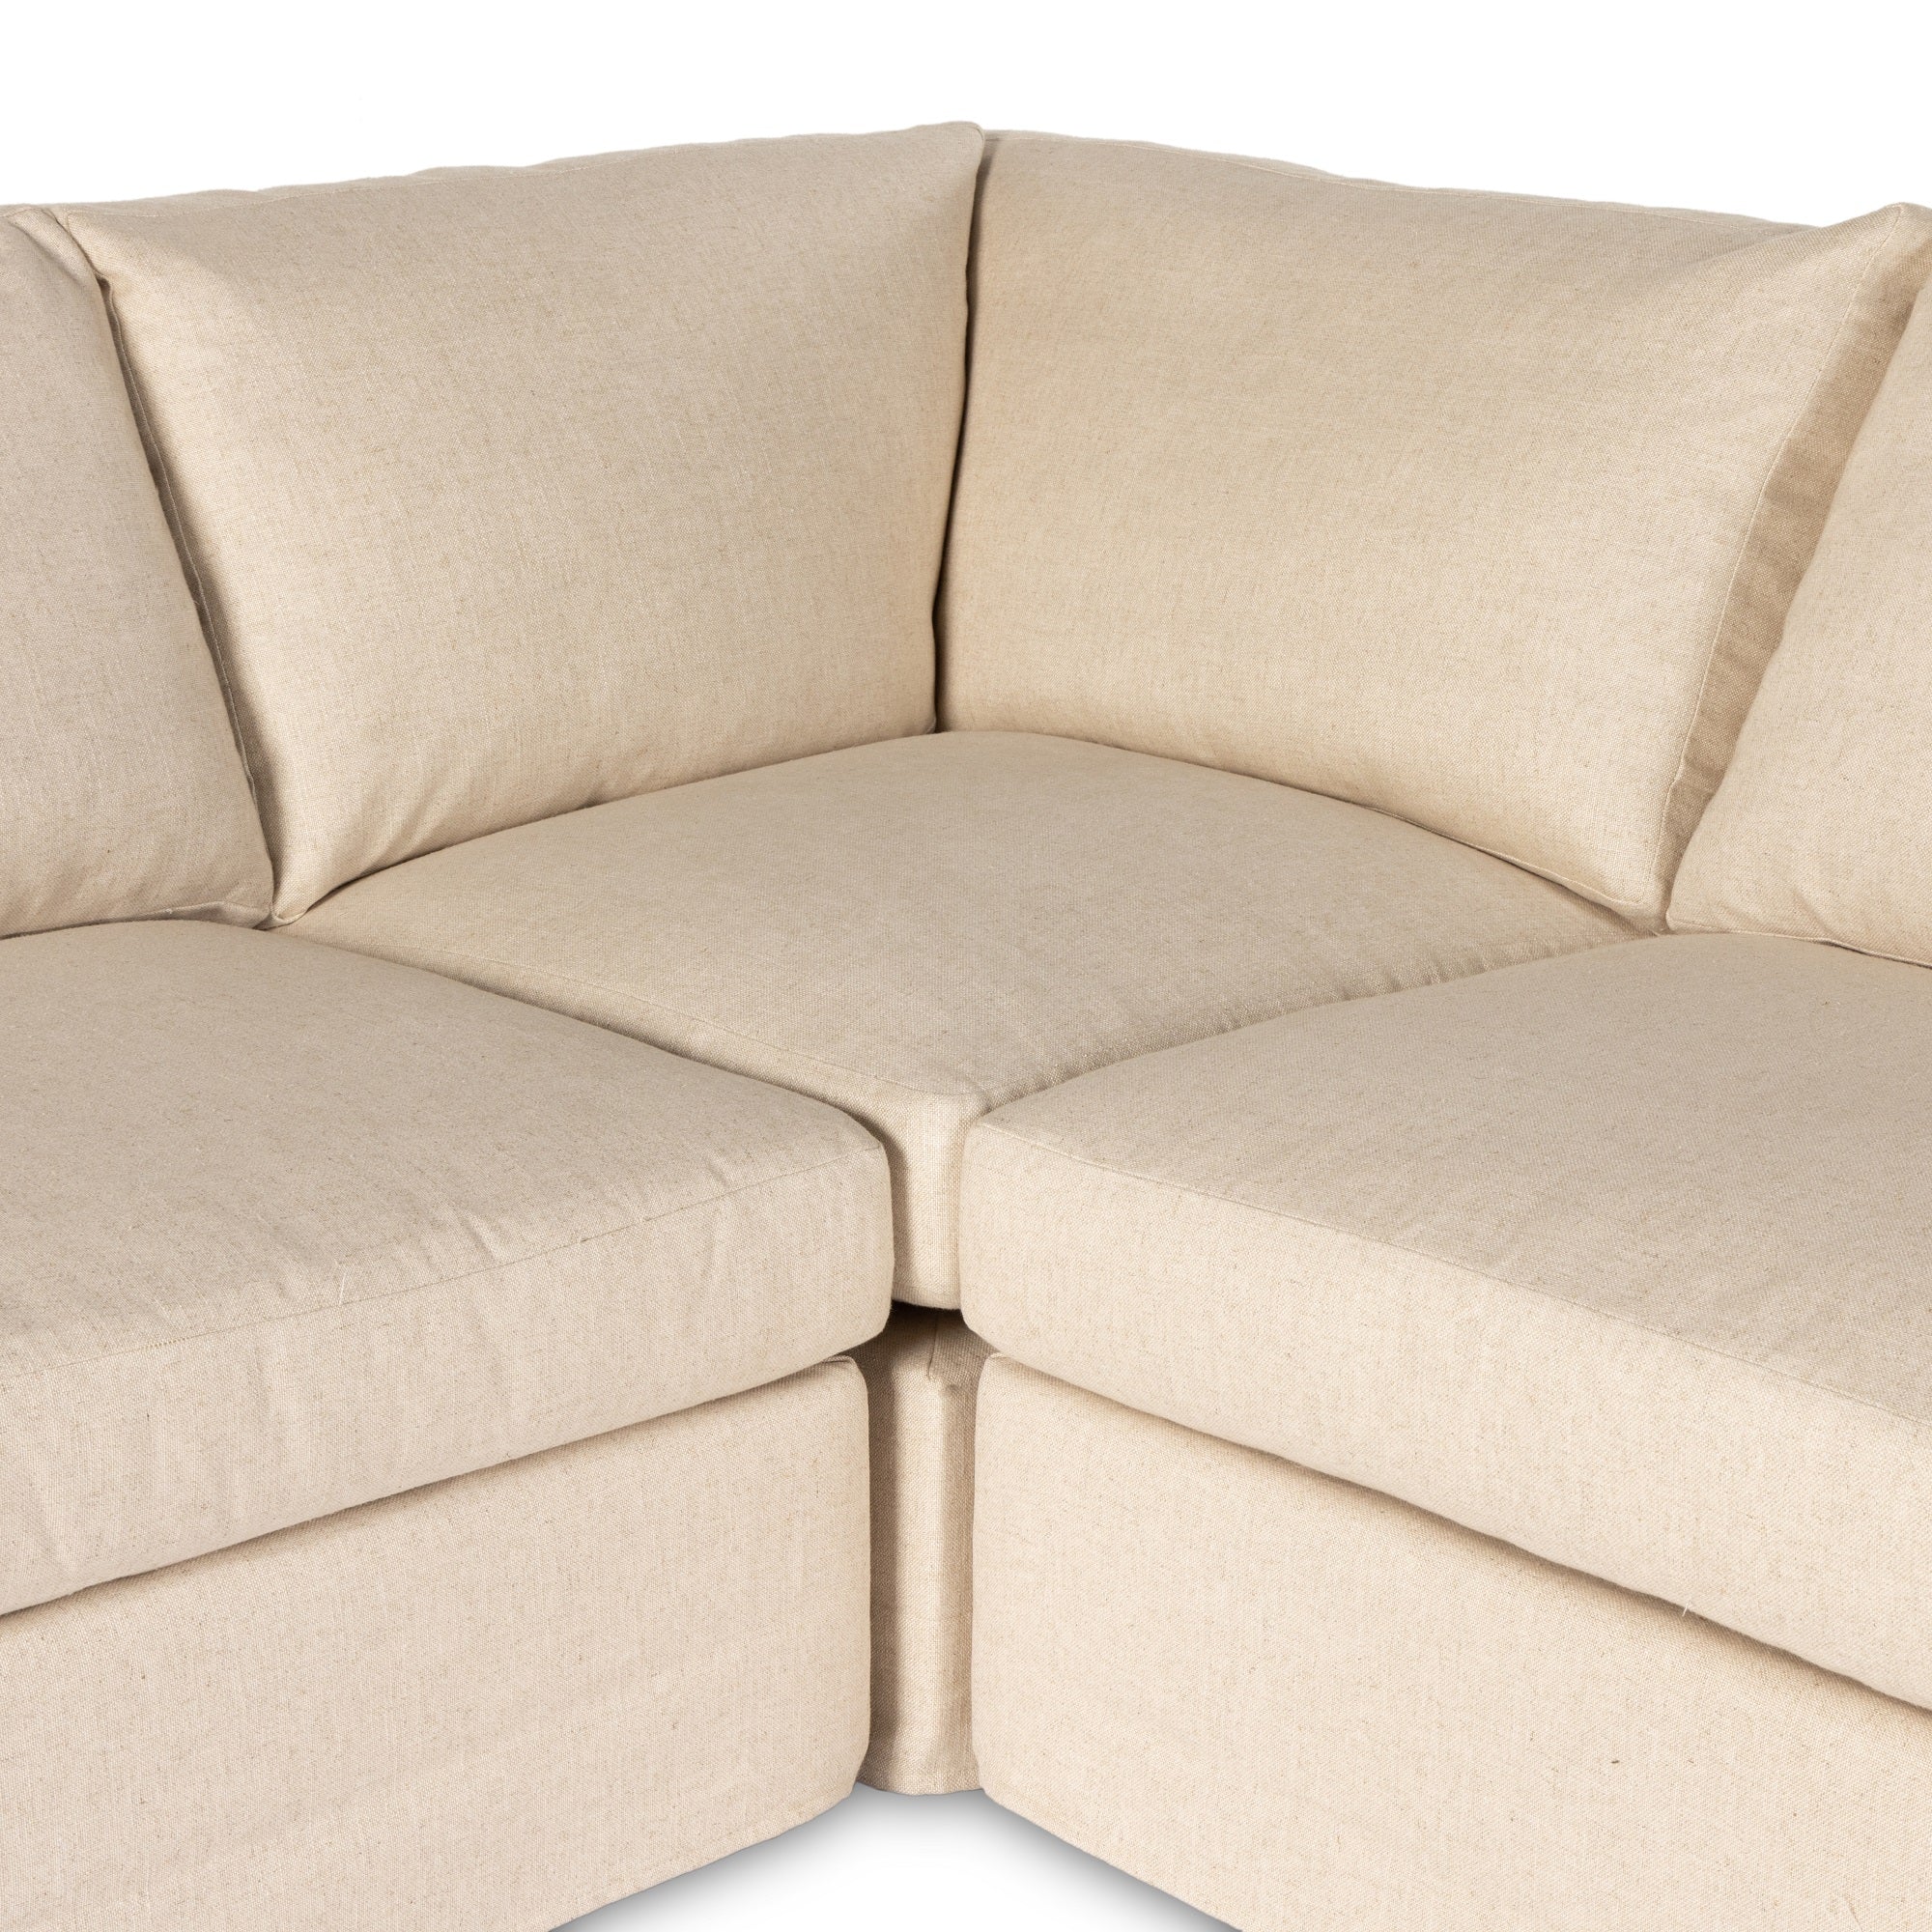 Delray 5-piece Slipcover Sectional